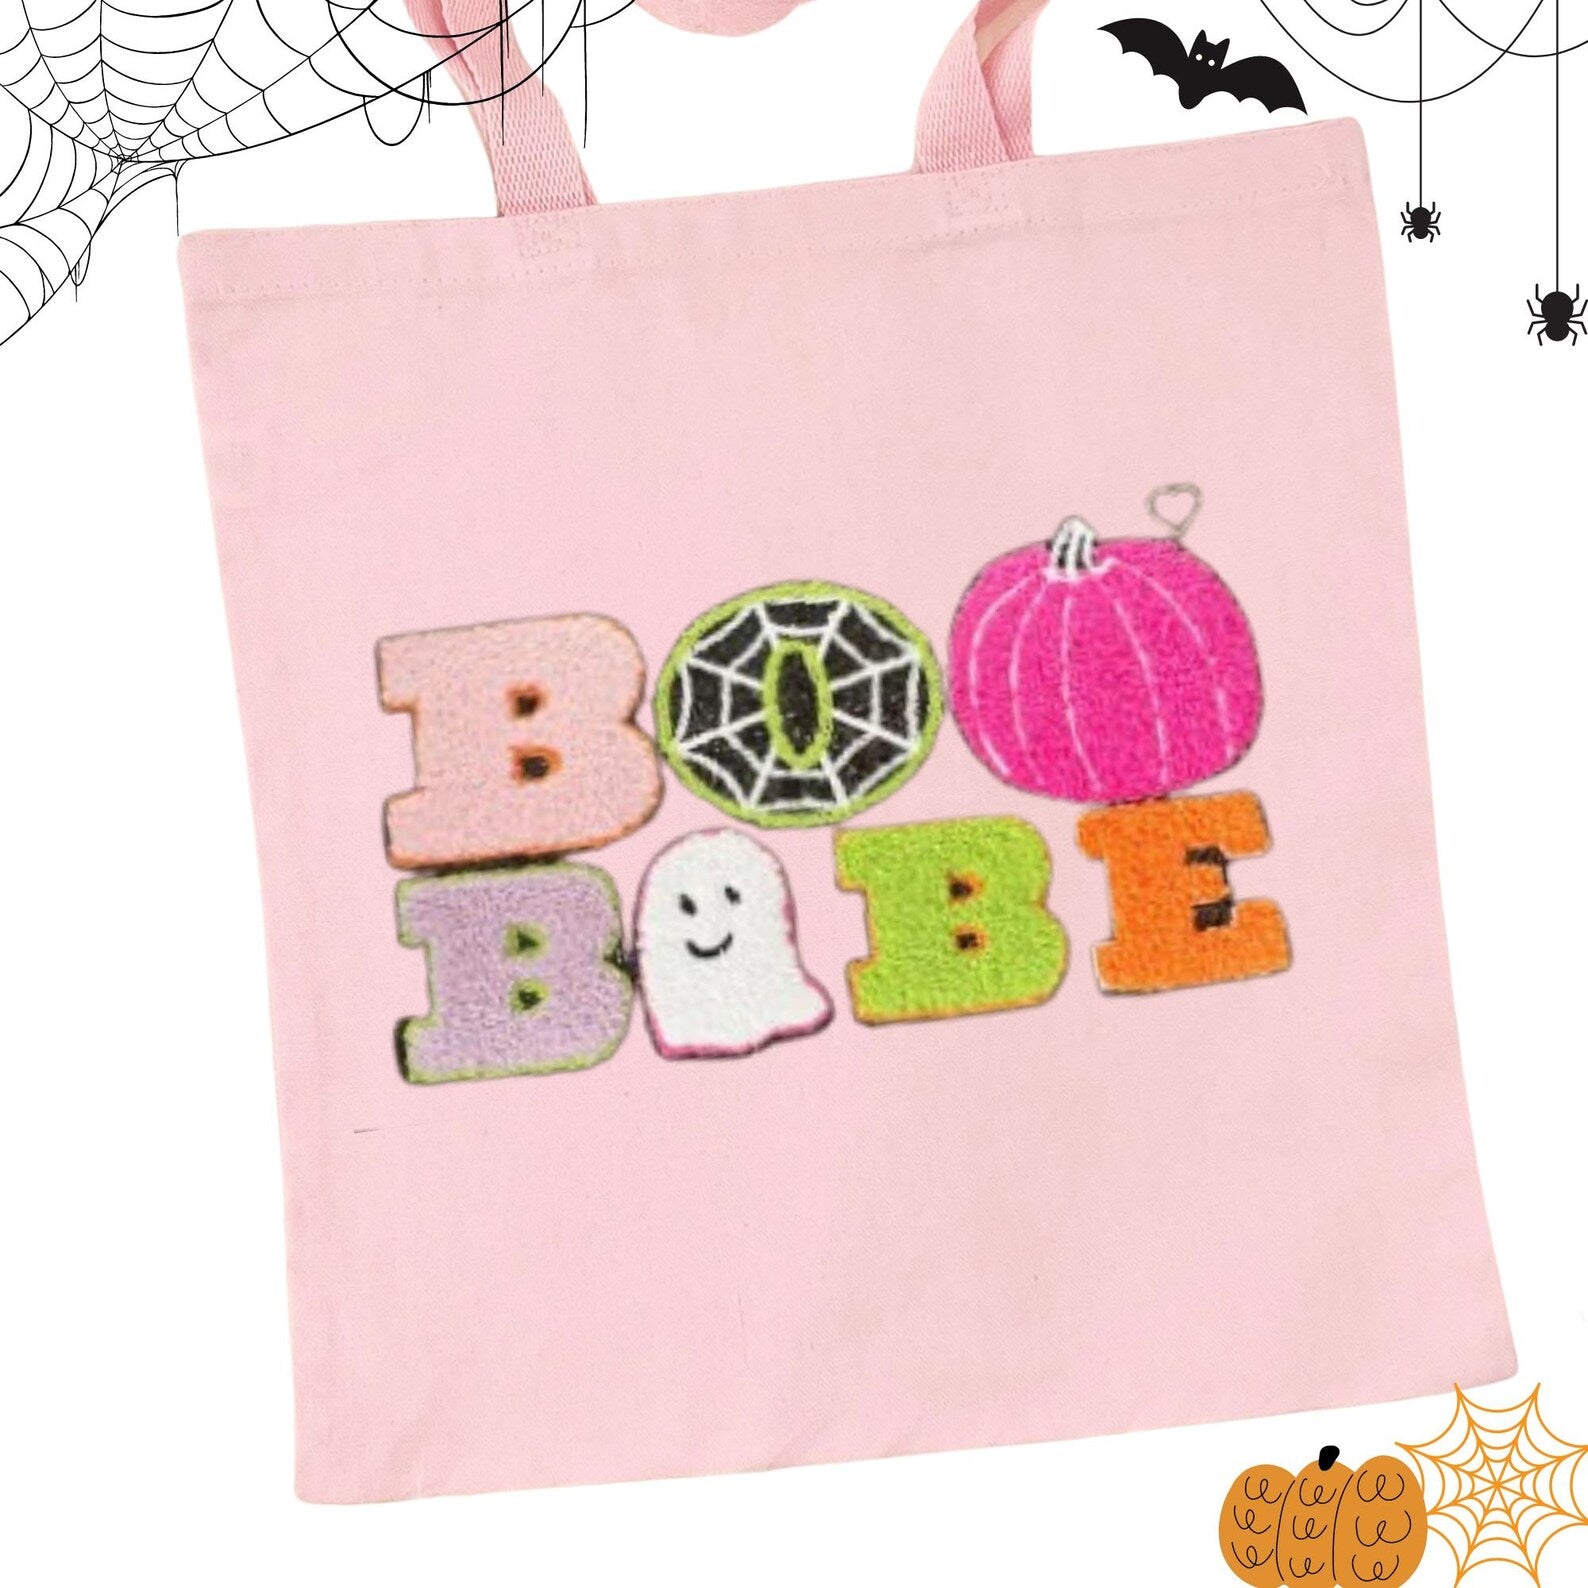 Halloween Tote Bag, Halloween Bag, Boo Tote Bag, Halloween Trick or Treat Bag, Mommy and Me Halloween, Chenille Patch, Boo Babe